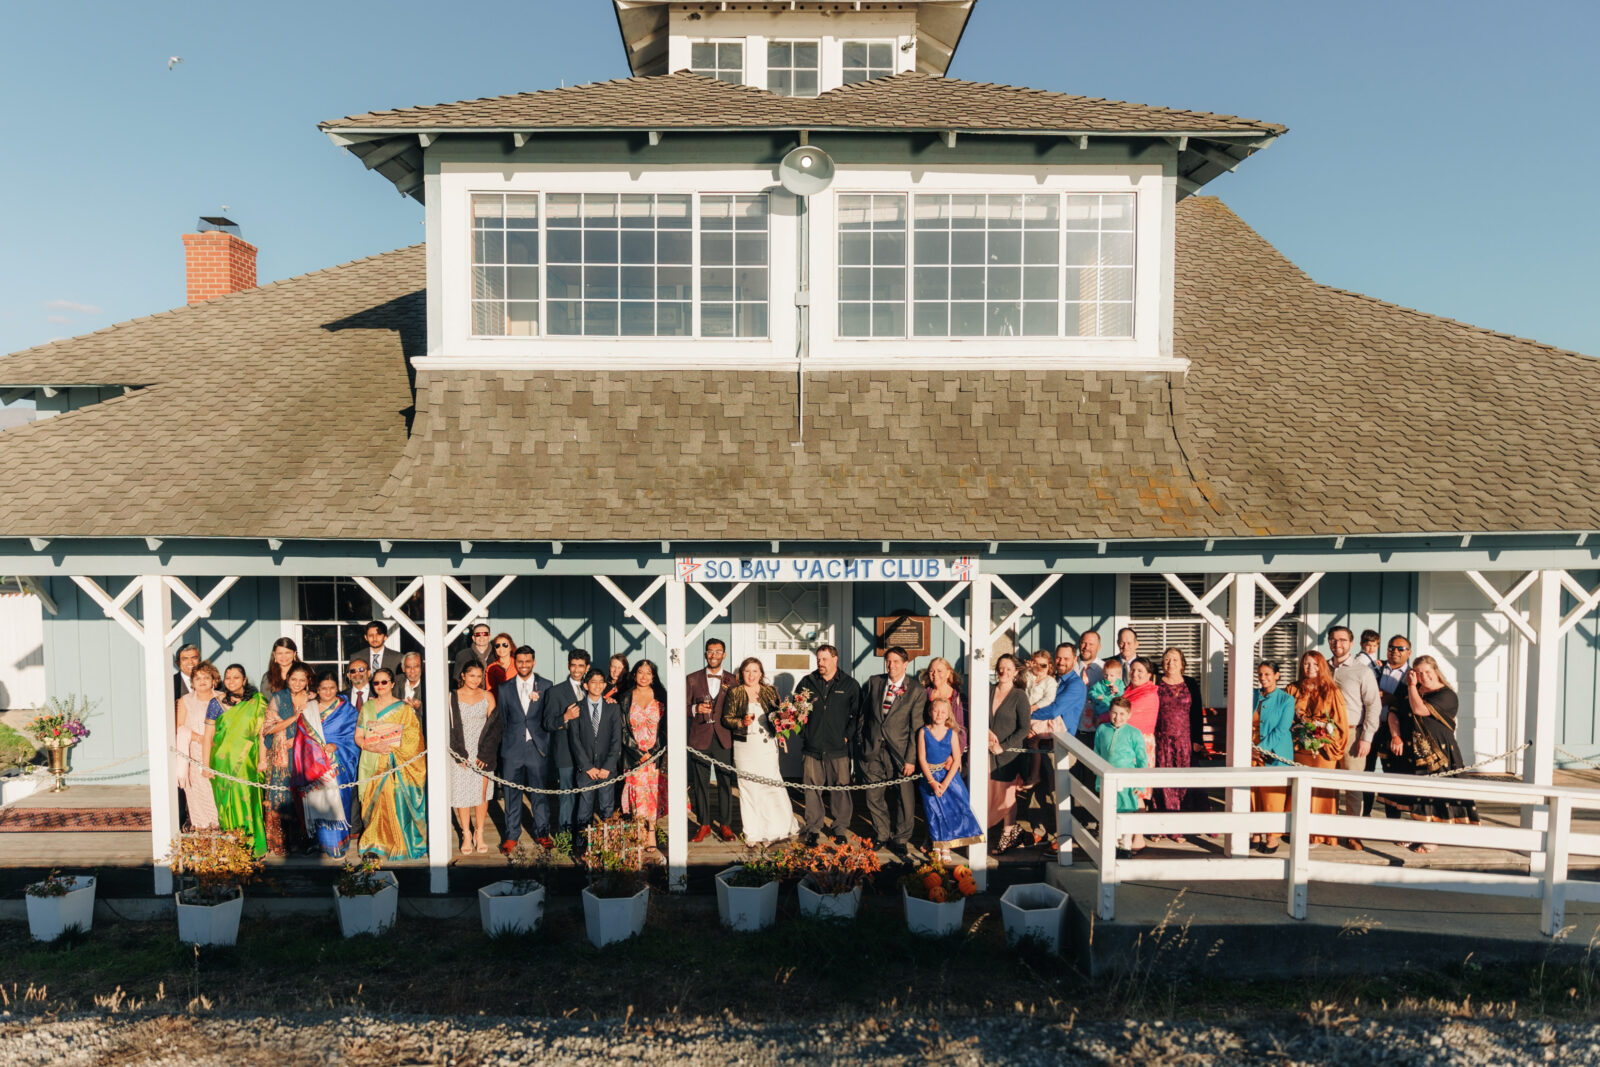 large group photo of all wedding guests together on a front porch of a blue yacht club